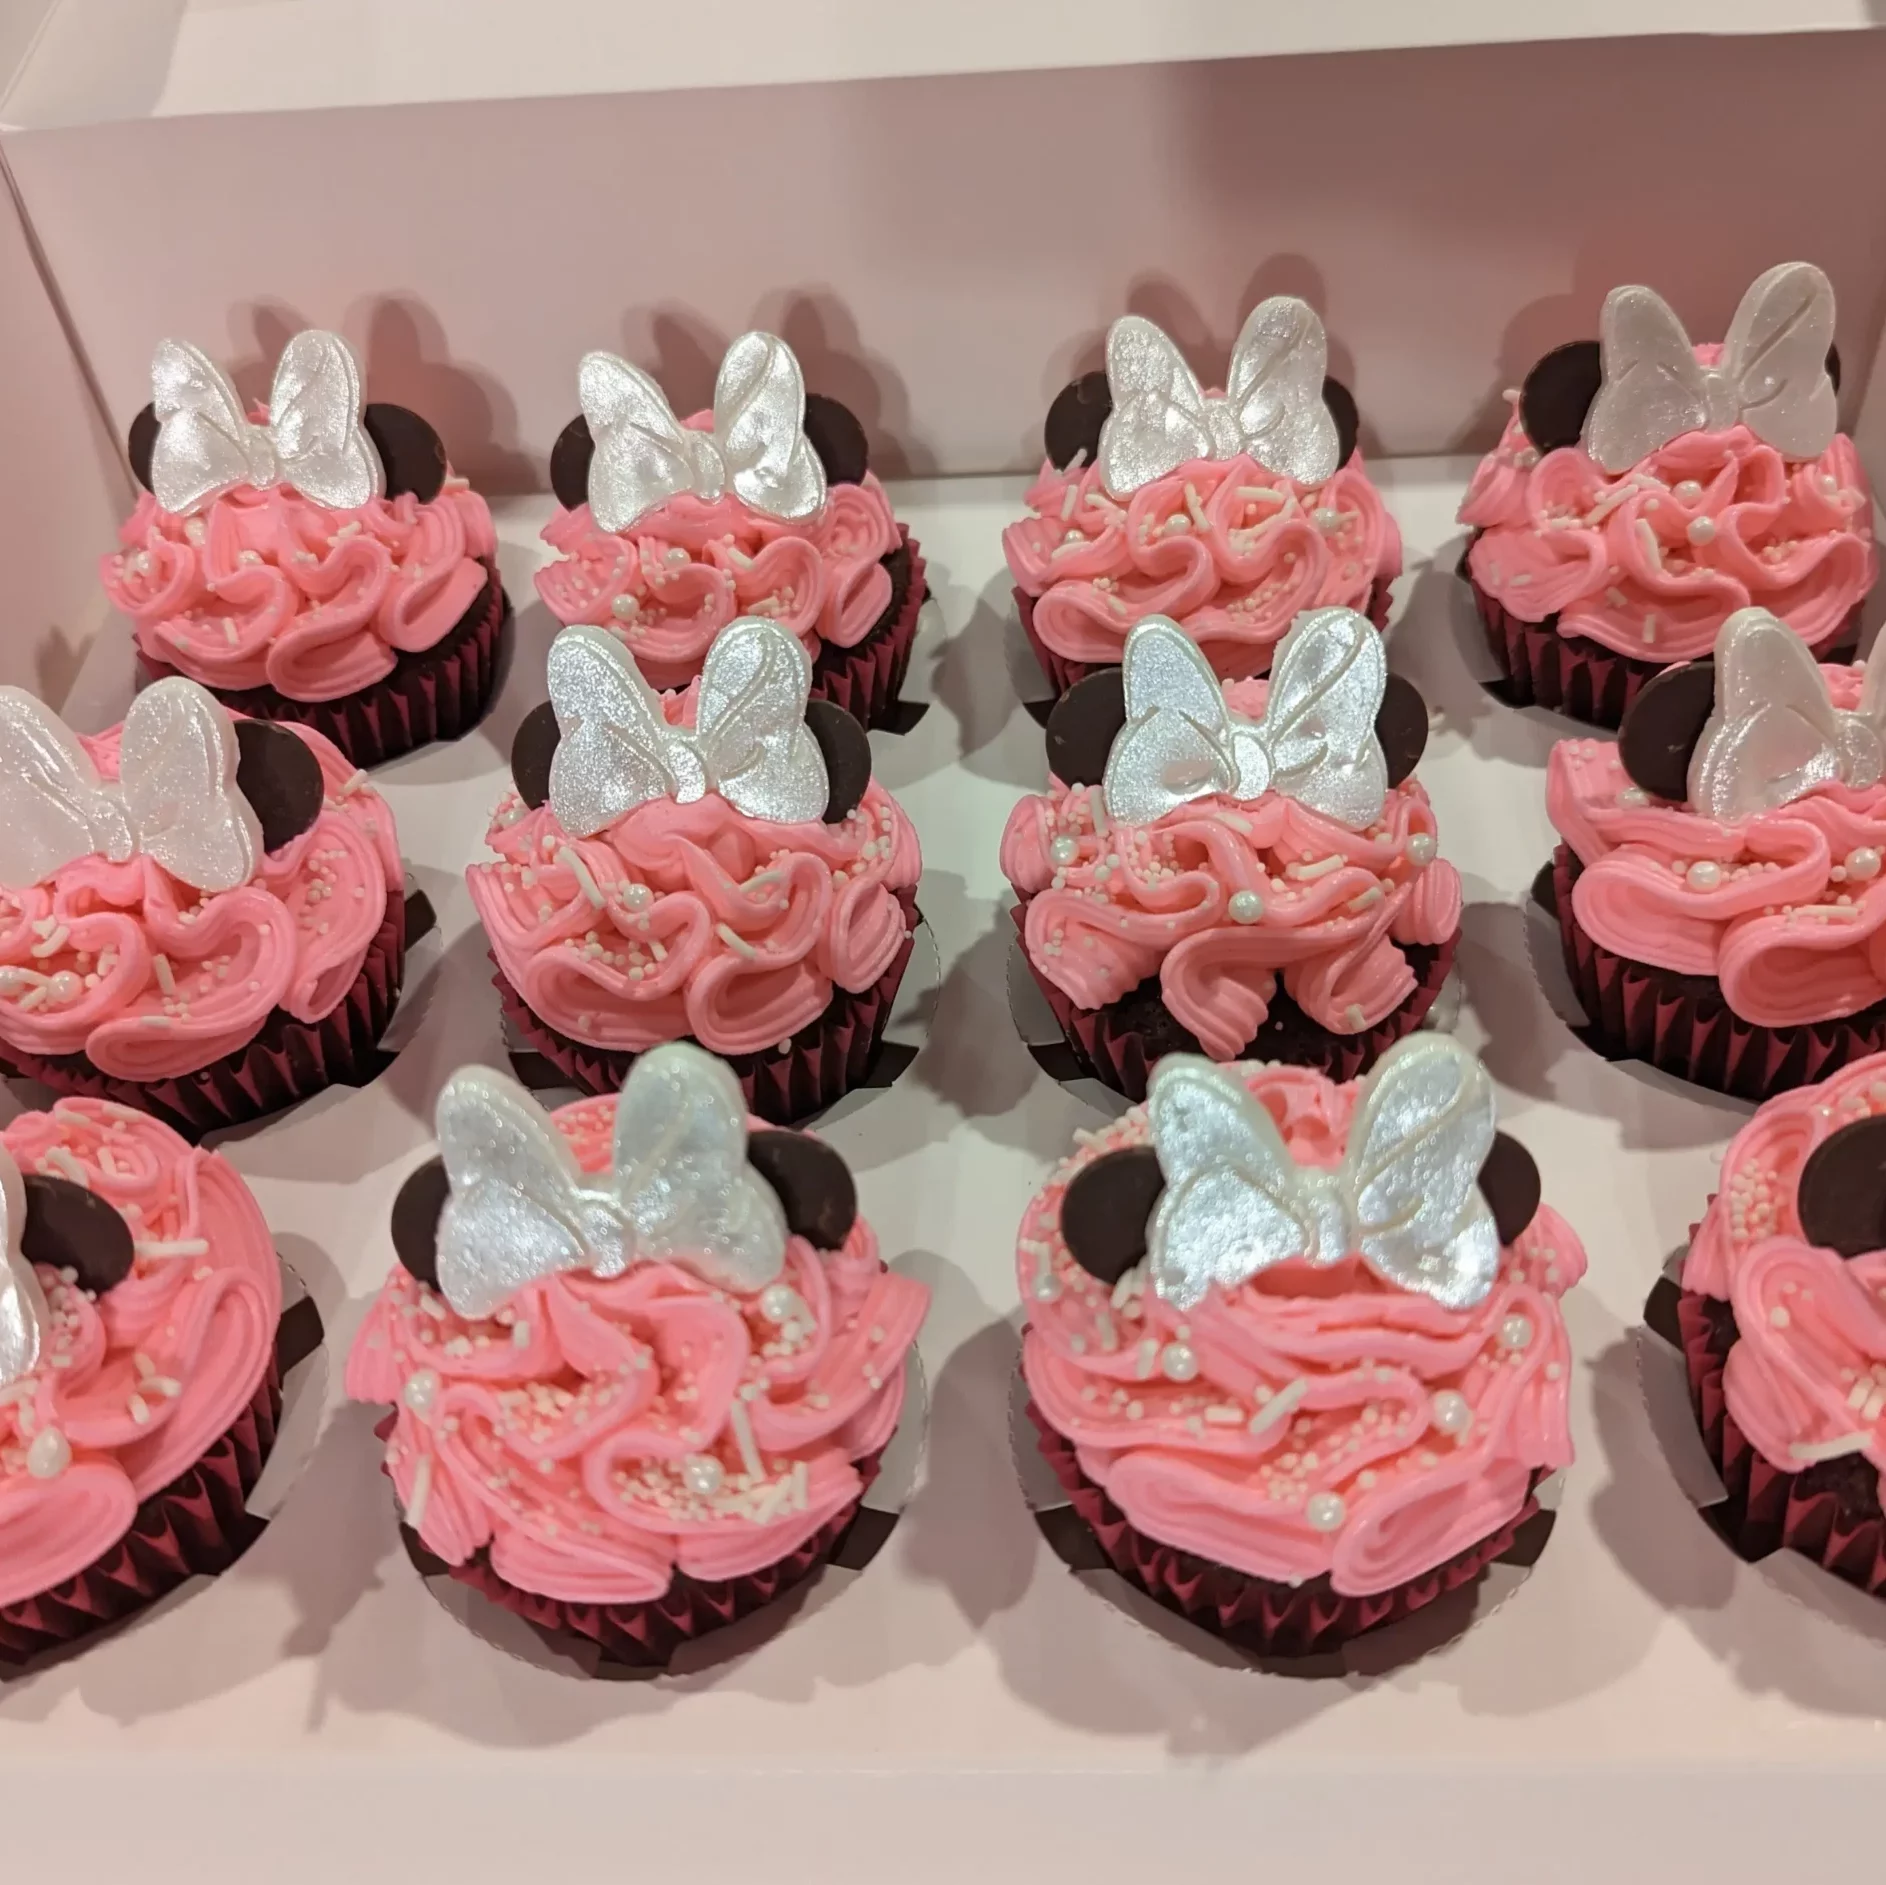 Delicious Cupcakes - Minnie Mouse Cupcakes Cakes in Longmont Cake in Firestone Custom Cakes